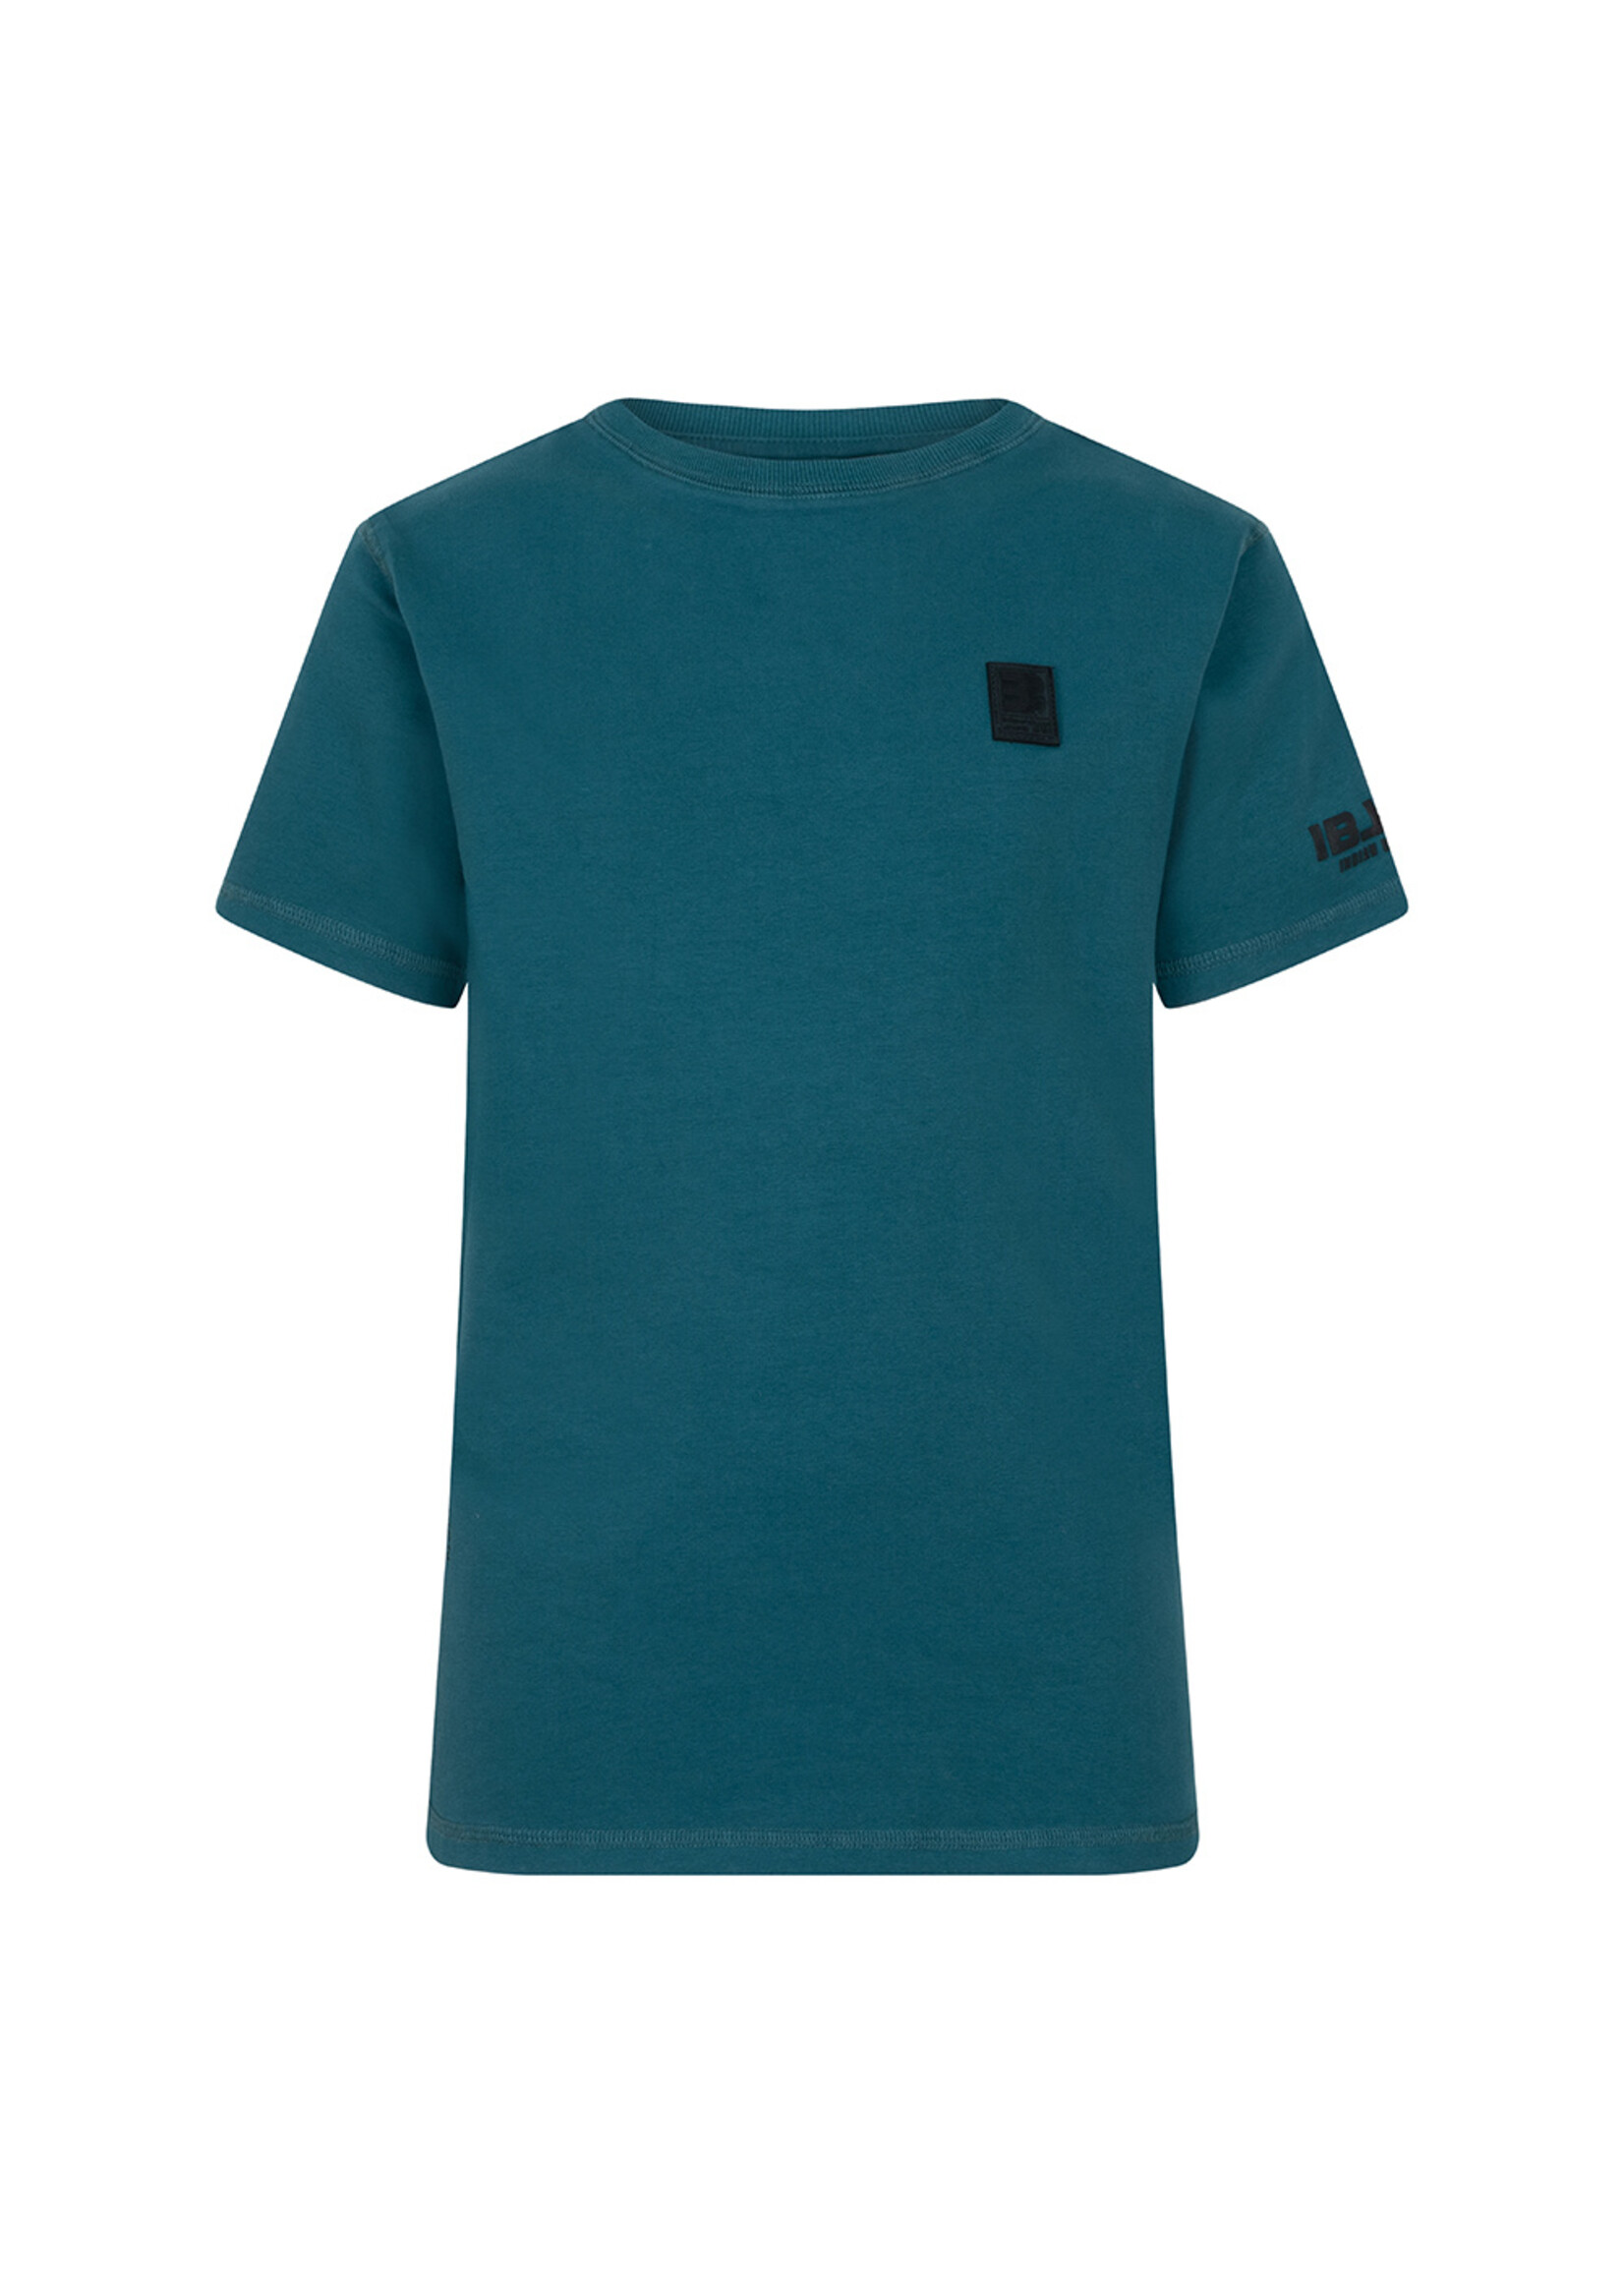 Indian Blue Jeans T-Shirt Fancy Basic Long Pacific Green